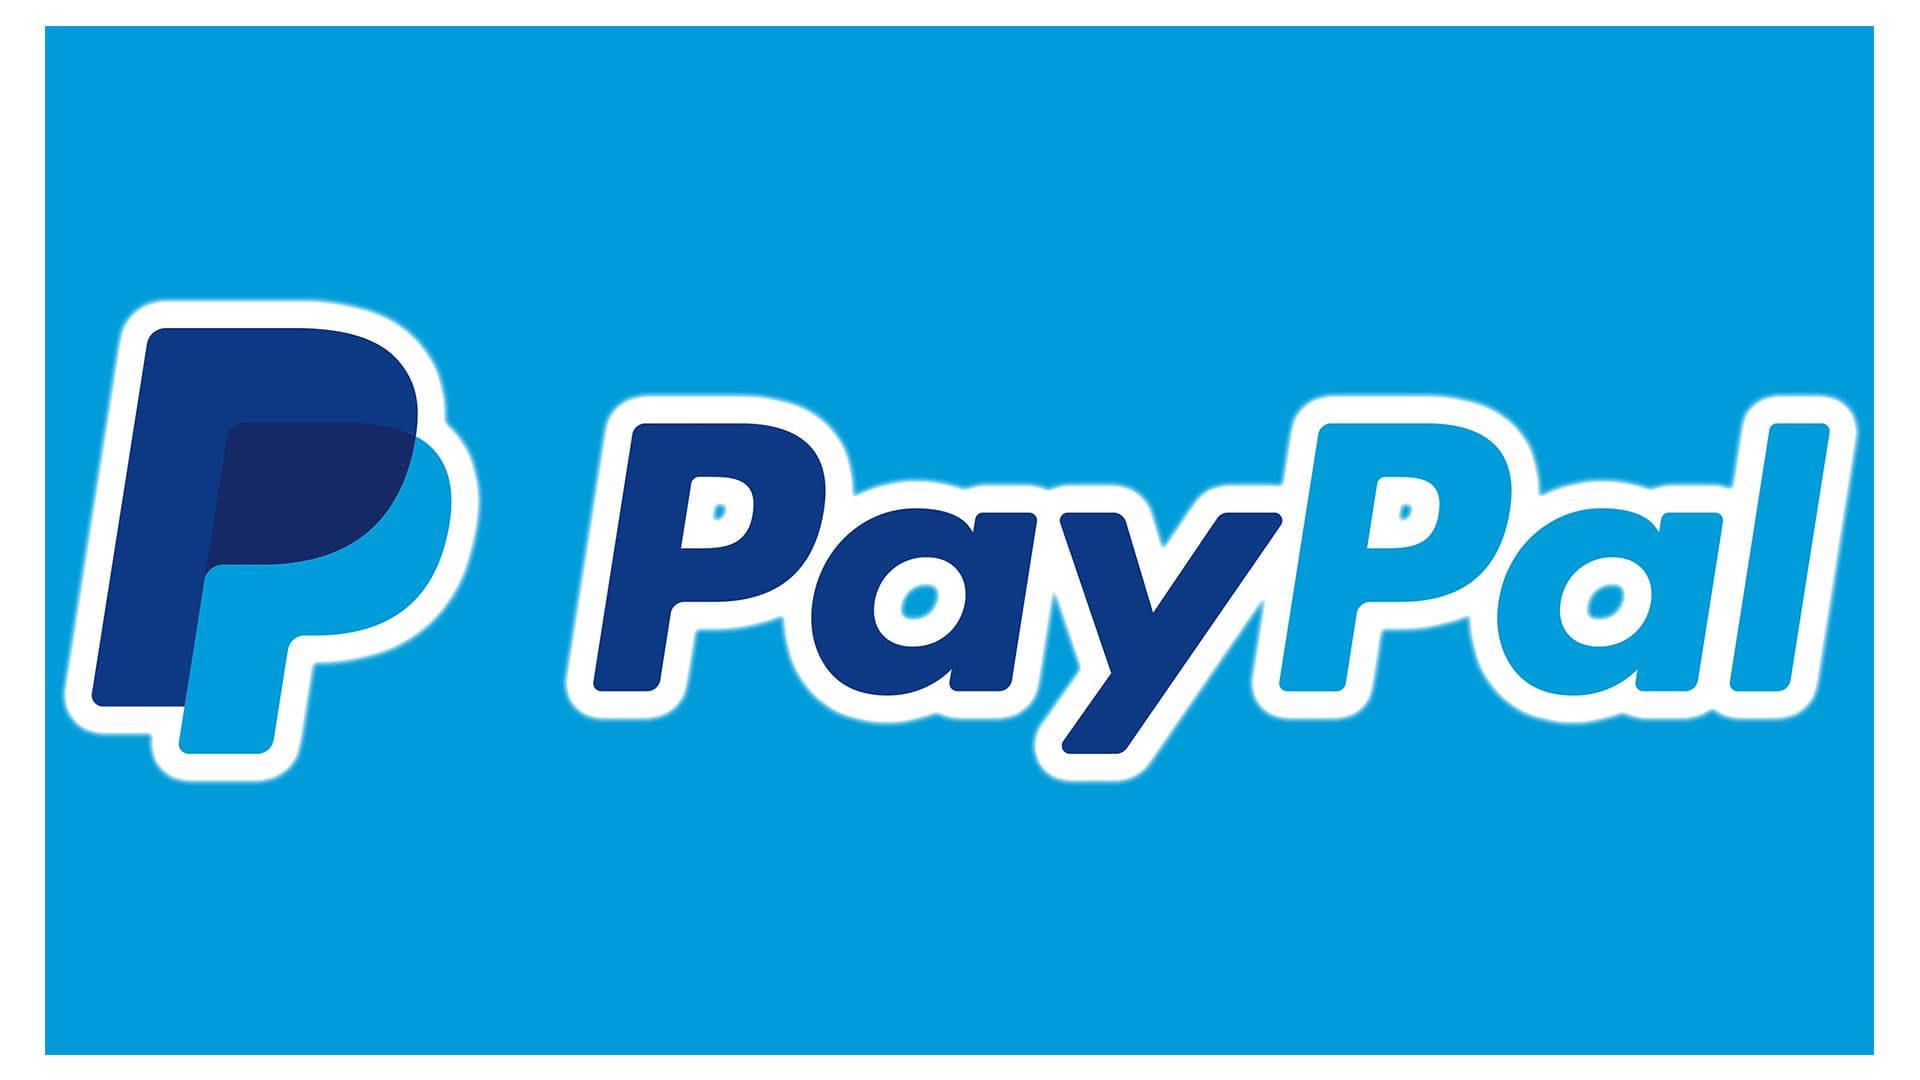 A Vibrant Paypal Logo Against A Sky Blue Background Background